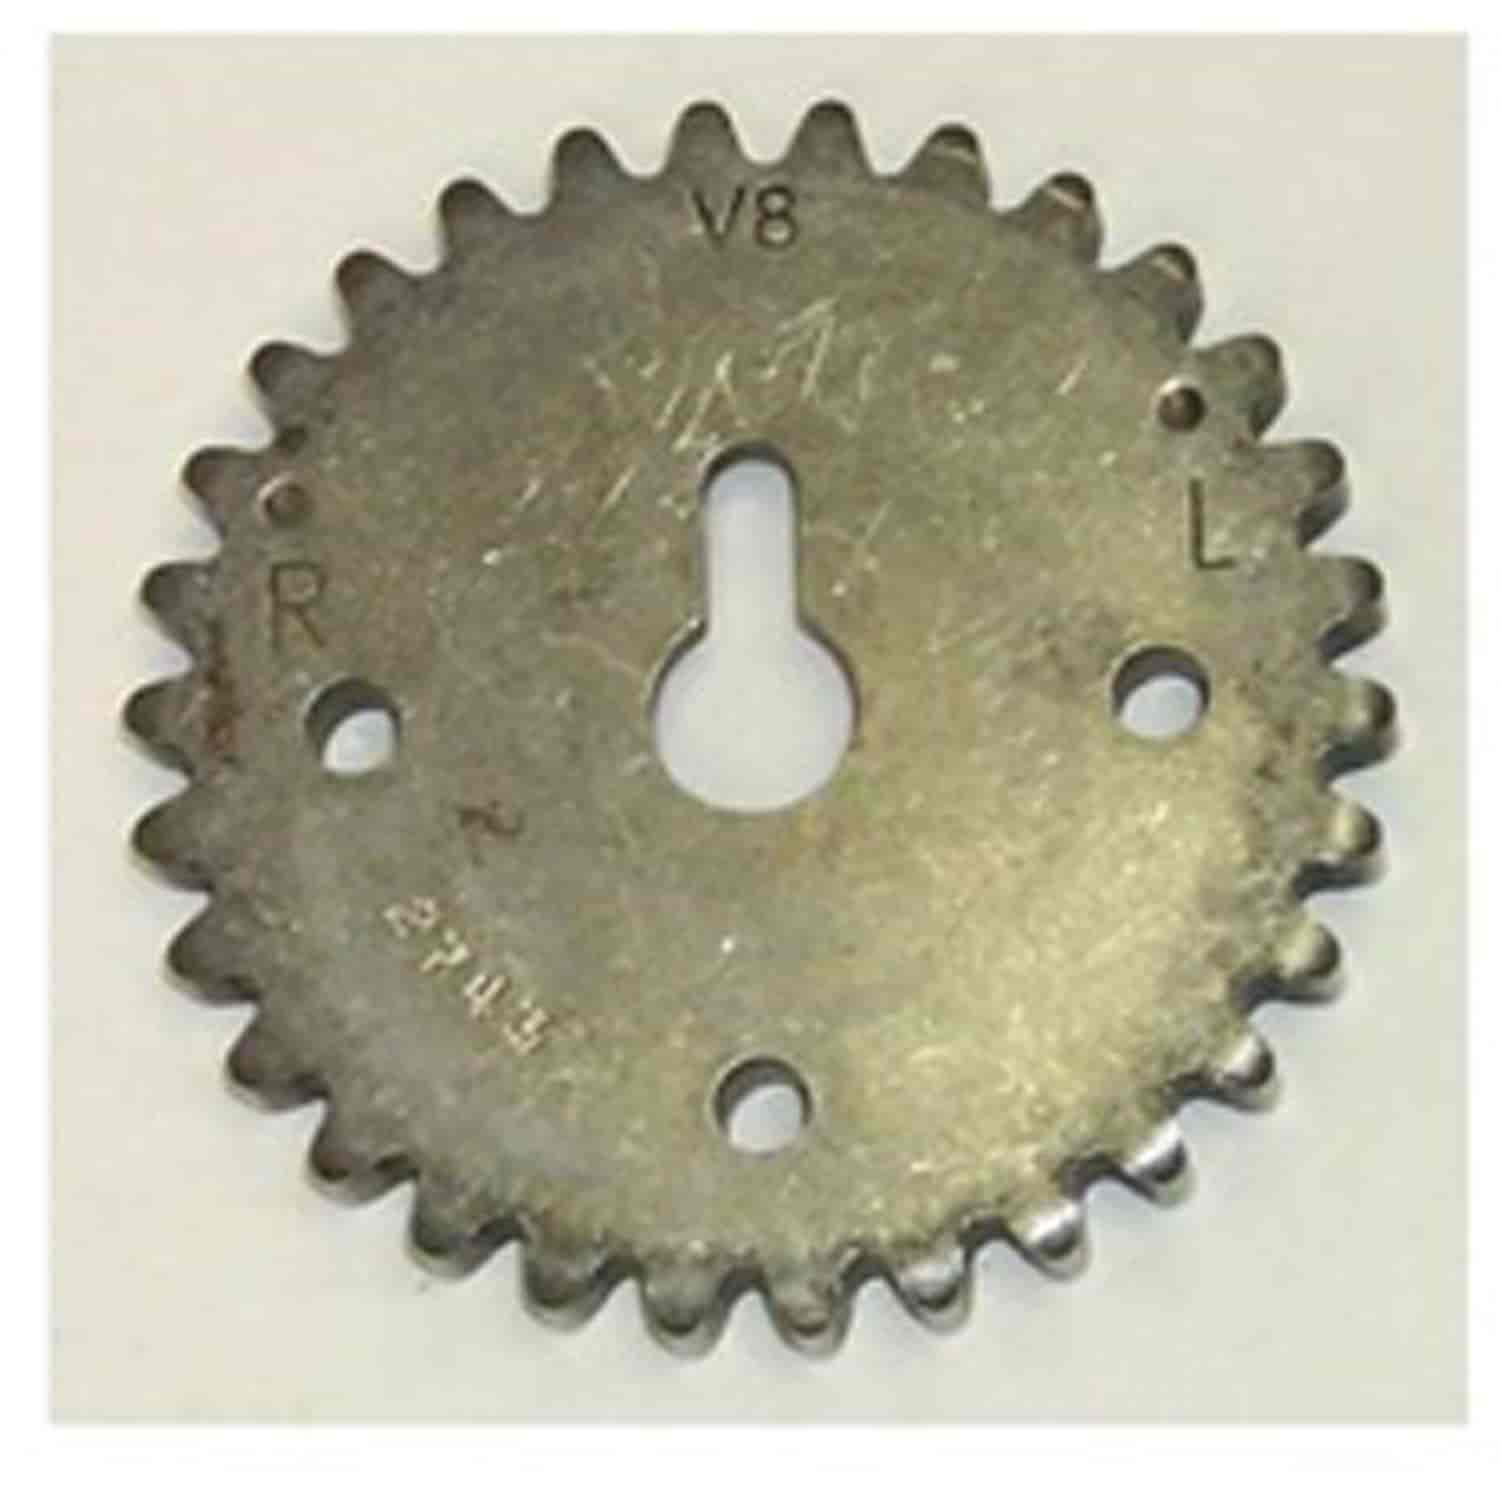 This camshaft sprocket from Omix-ADA fits the left